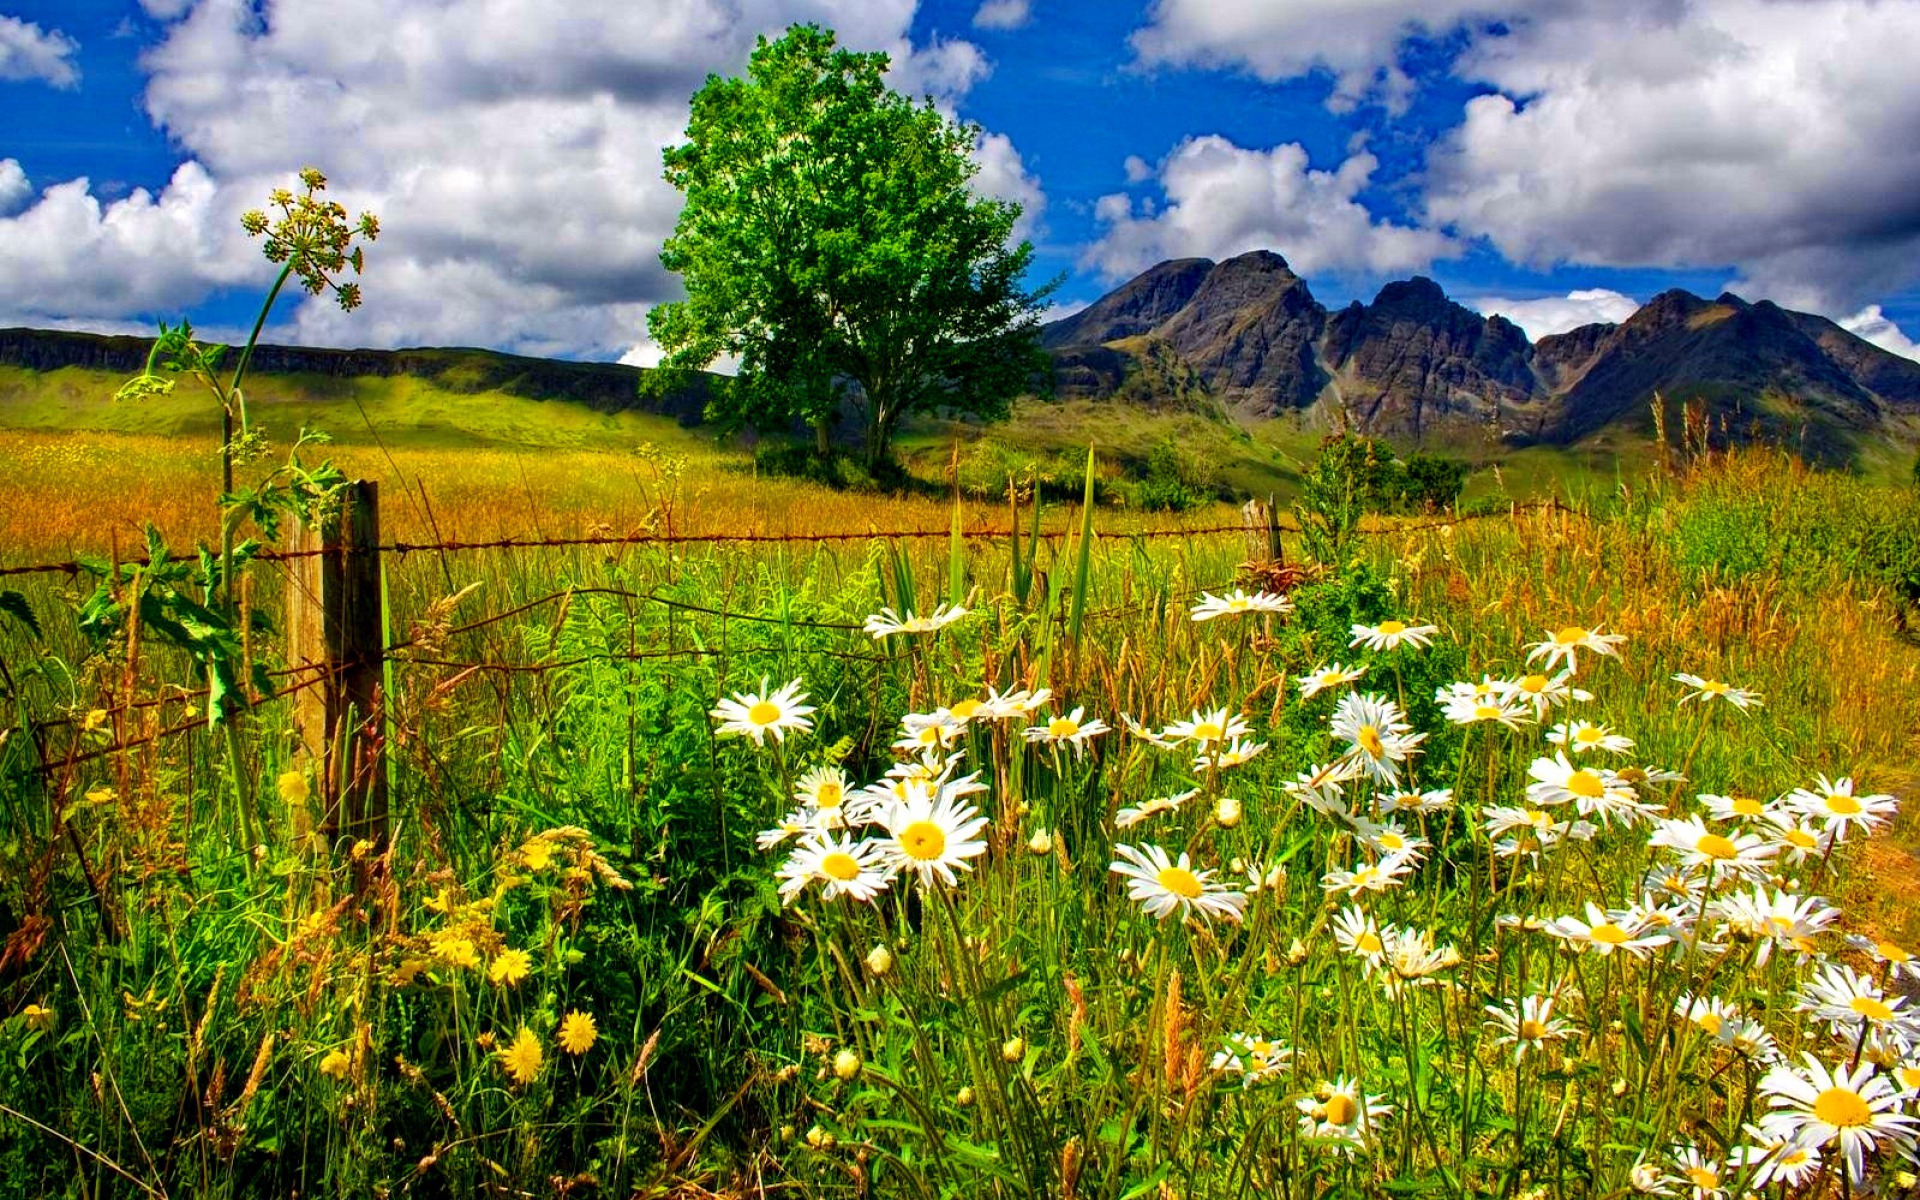 Spring Landscape, Chamomile Flowers And Green Grass, Mountains, Blue Sky And White Cloud Beautiful HD Wallpaper, Wallpaper13.com